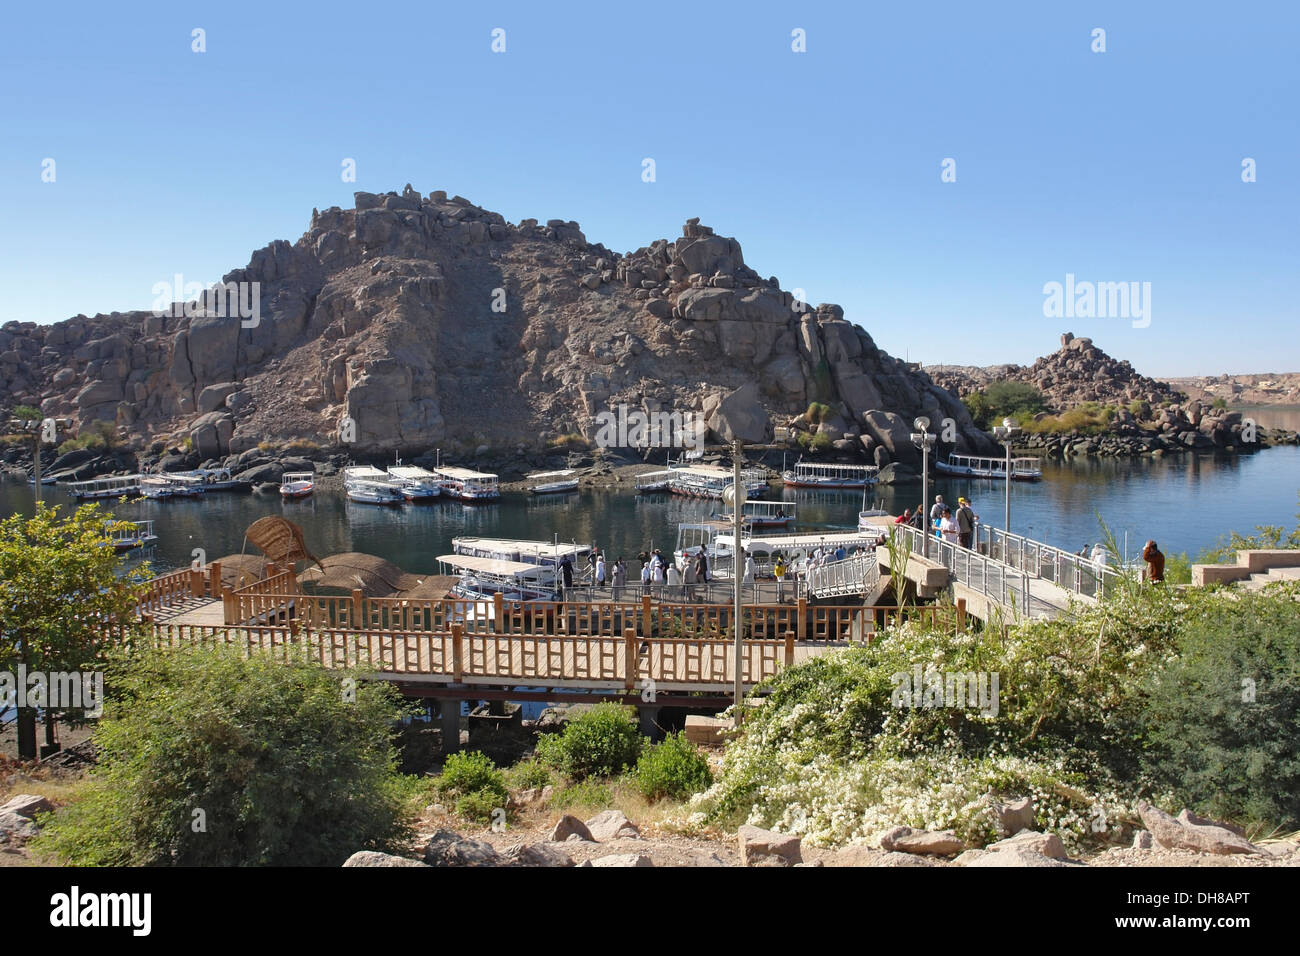 river nile with passenger boats near the Temple of Philae in Egypt (Africa) Stock Photo